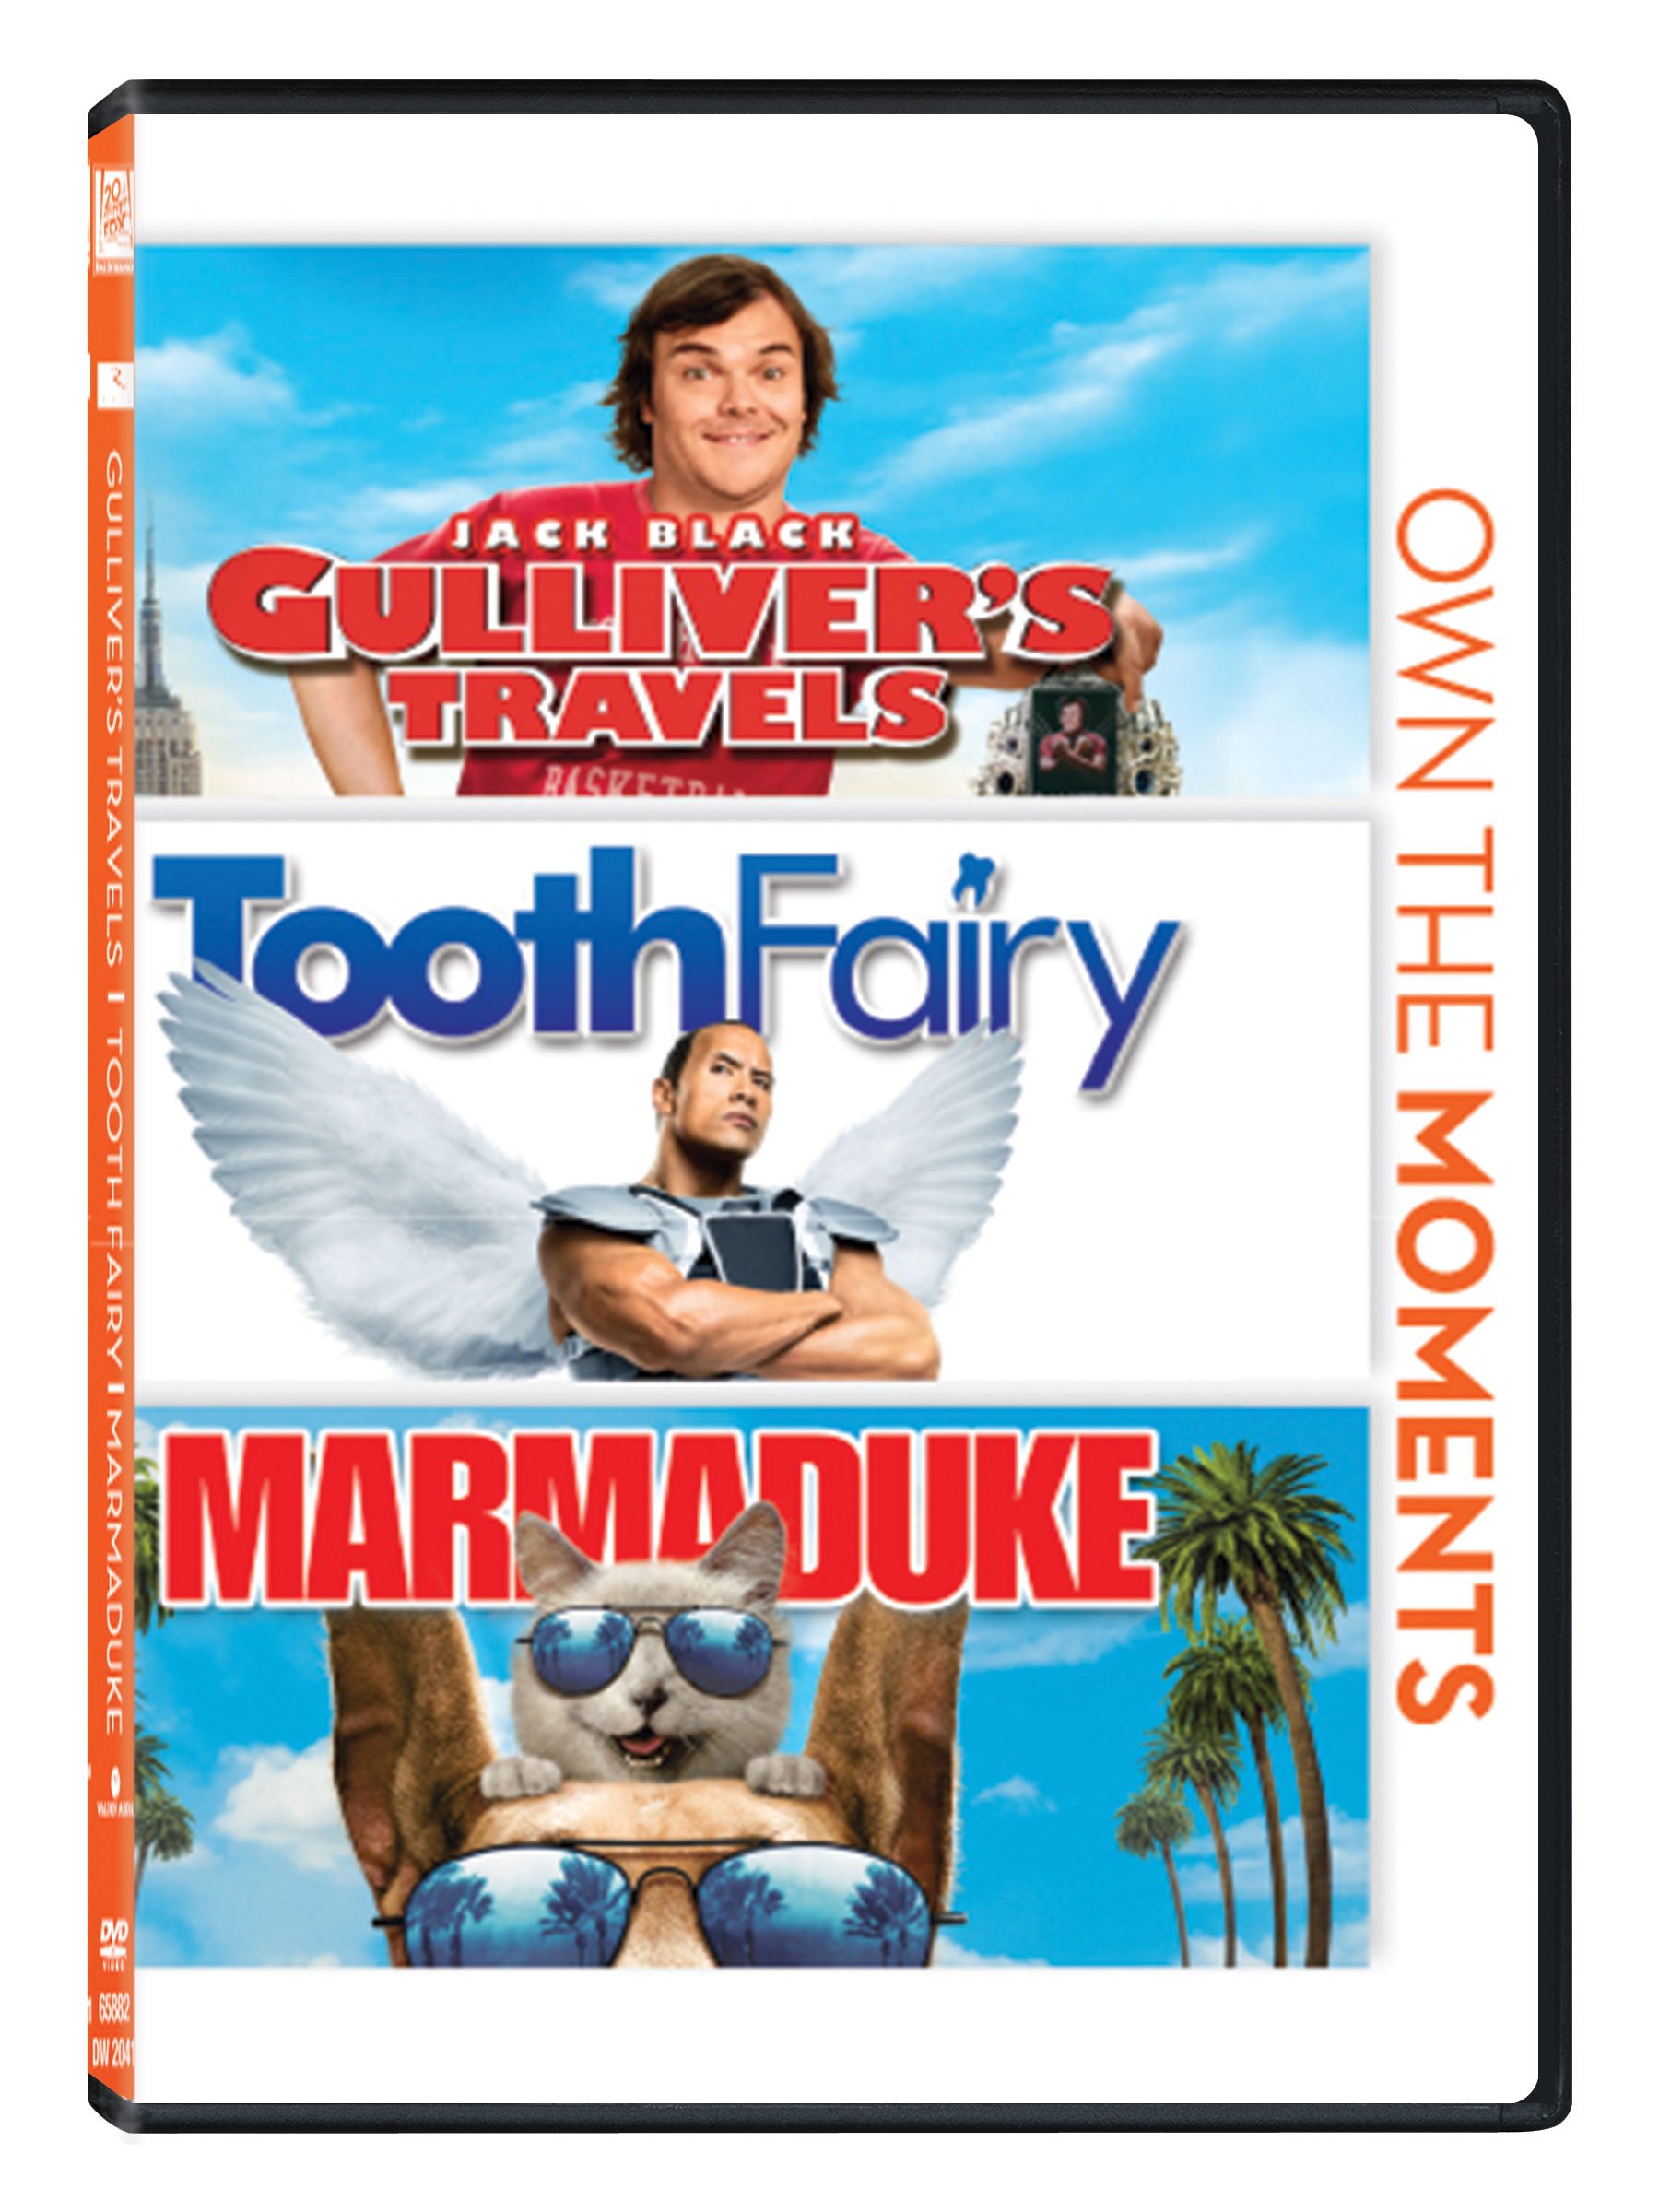 own-the-moments-gullivers-travels-tooth-fairy-marmaduke-3-disc-box-set